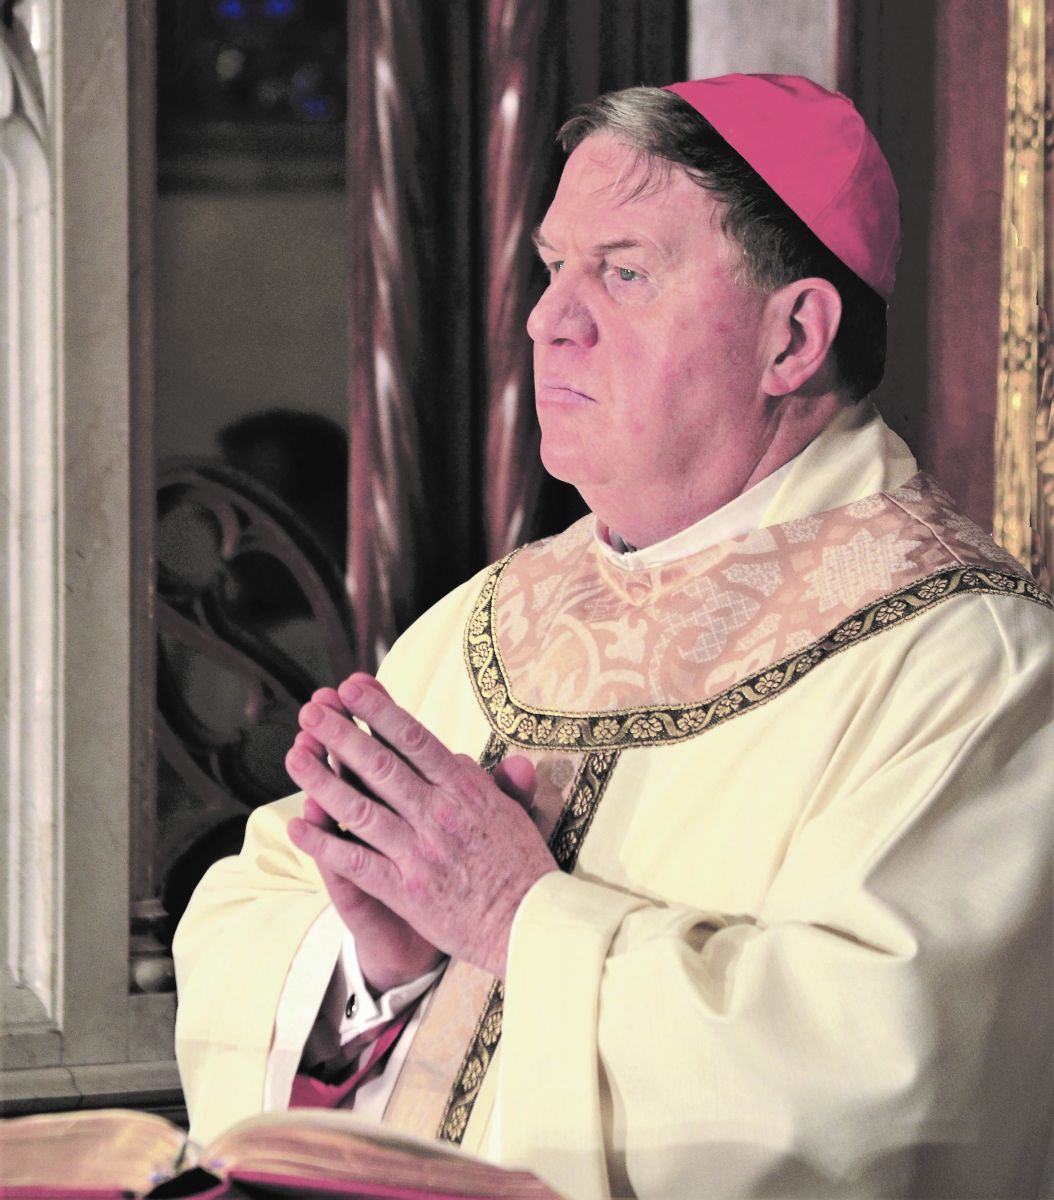 In the section "My Prayer for You", Cardinal Tobin is standing with his hands together in prayer.